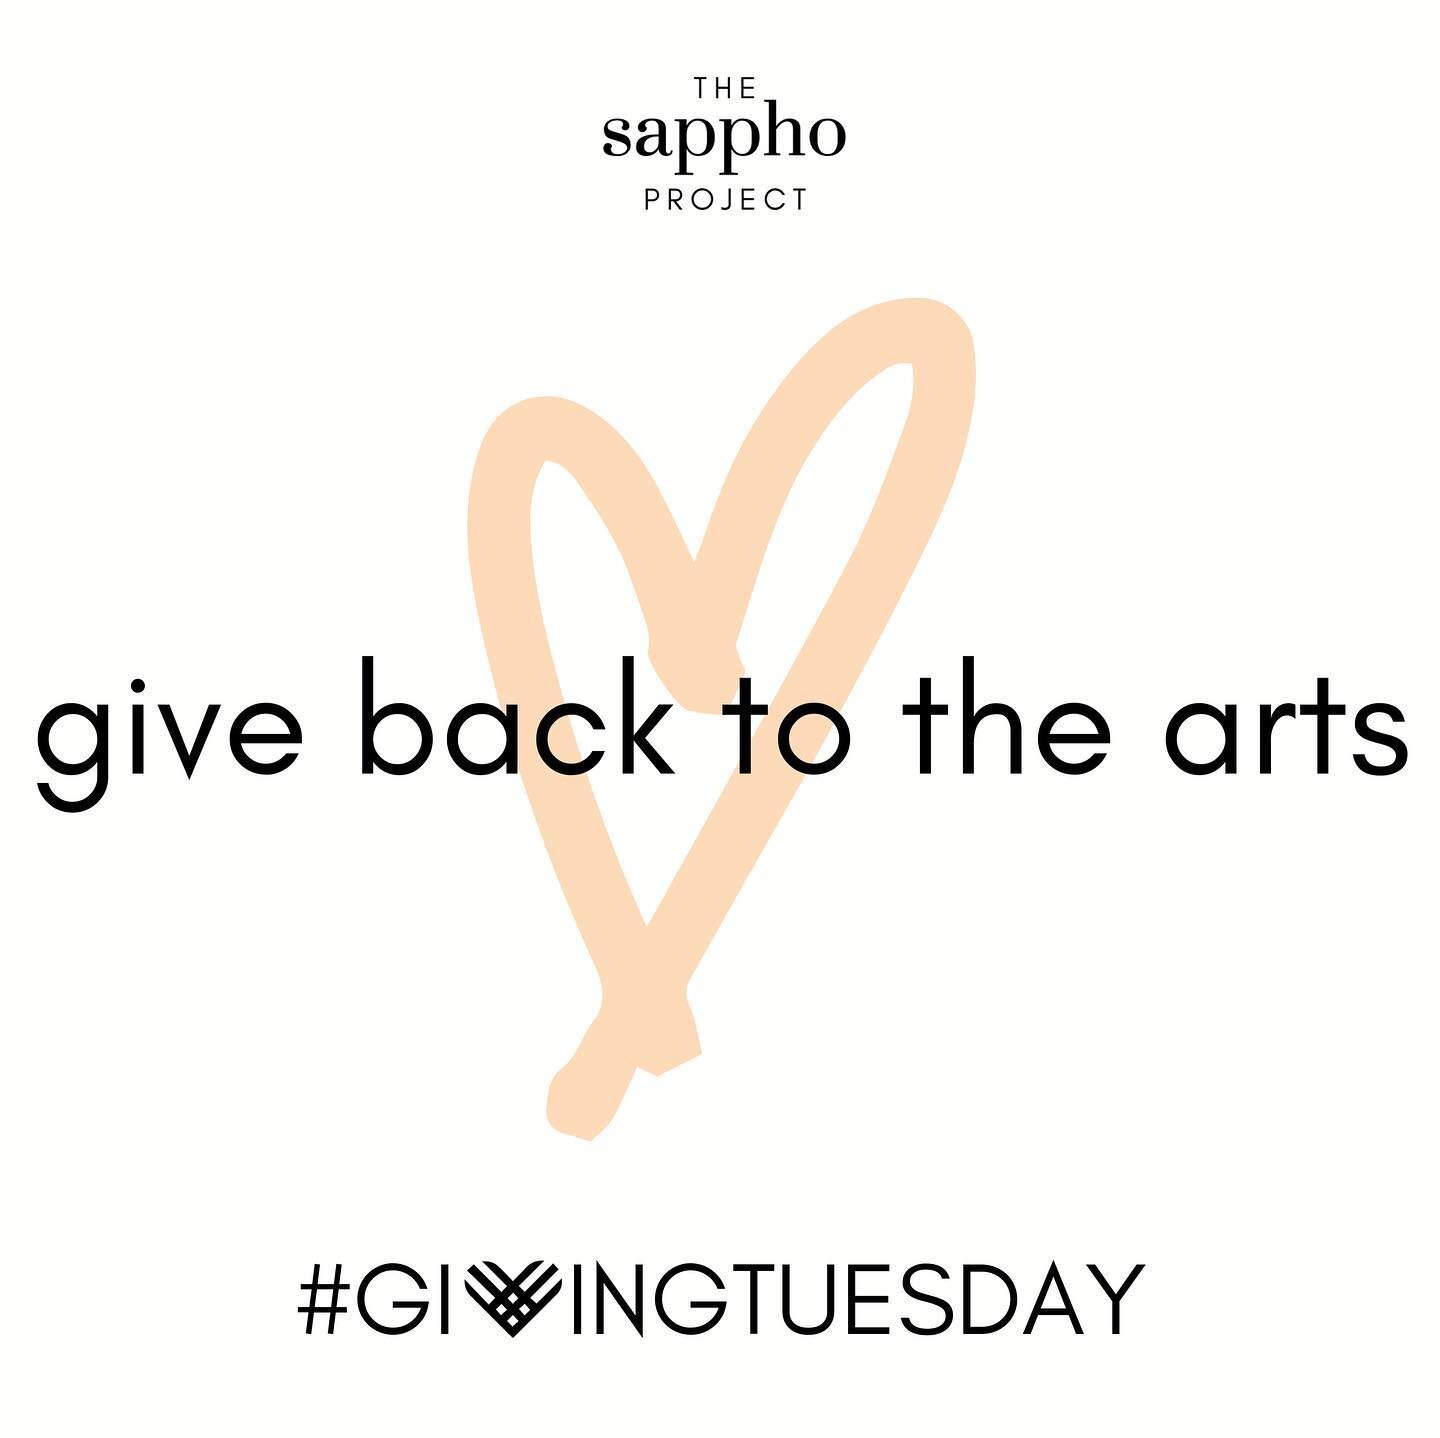 LINK IN THE BIO! Give back to the arts this #GIVINGTUESDAY 💙

At The Sappho Project, we believe that working towards gender parity in the creation of new musicals is the future of the theater industry. Women, trans, and gender non-conforming writers